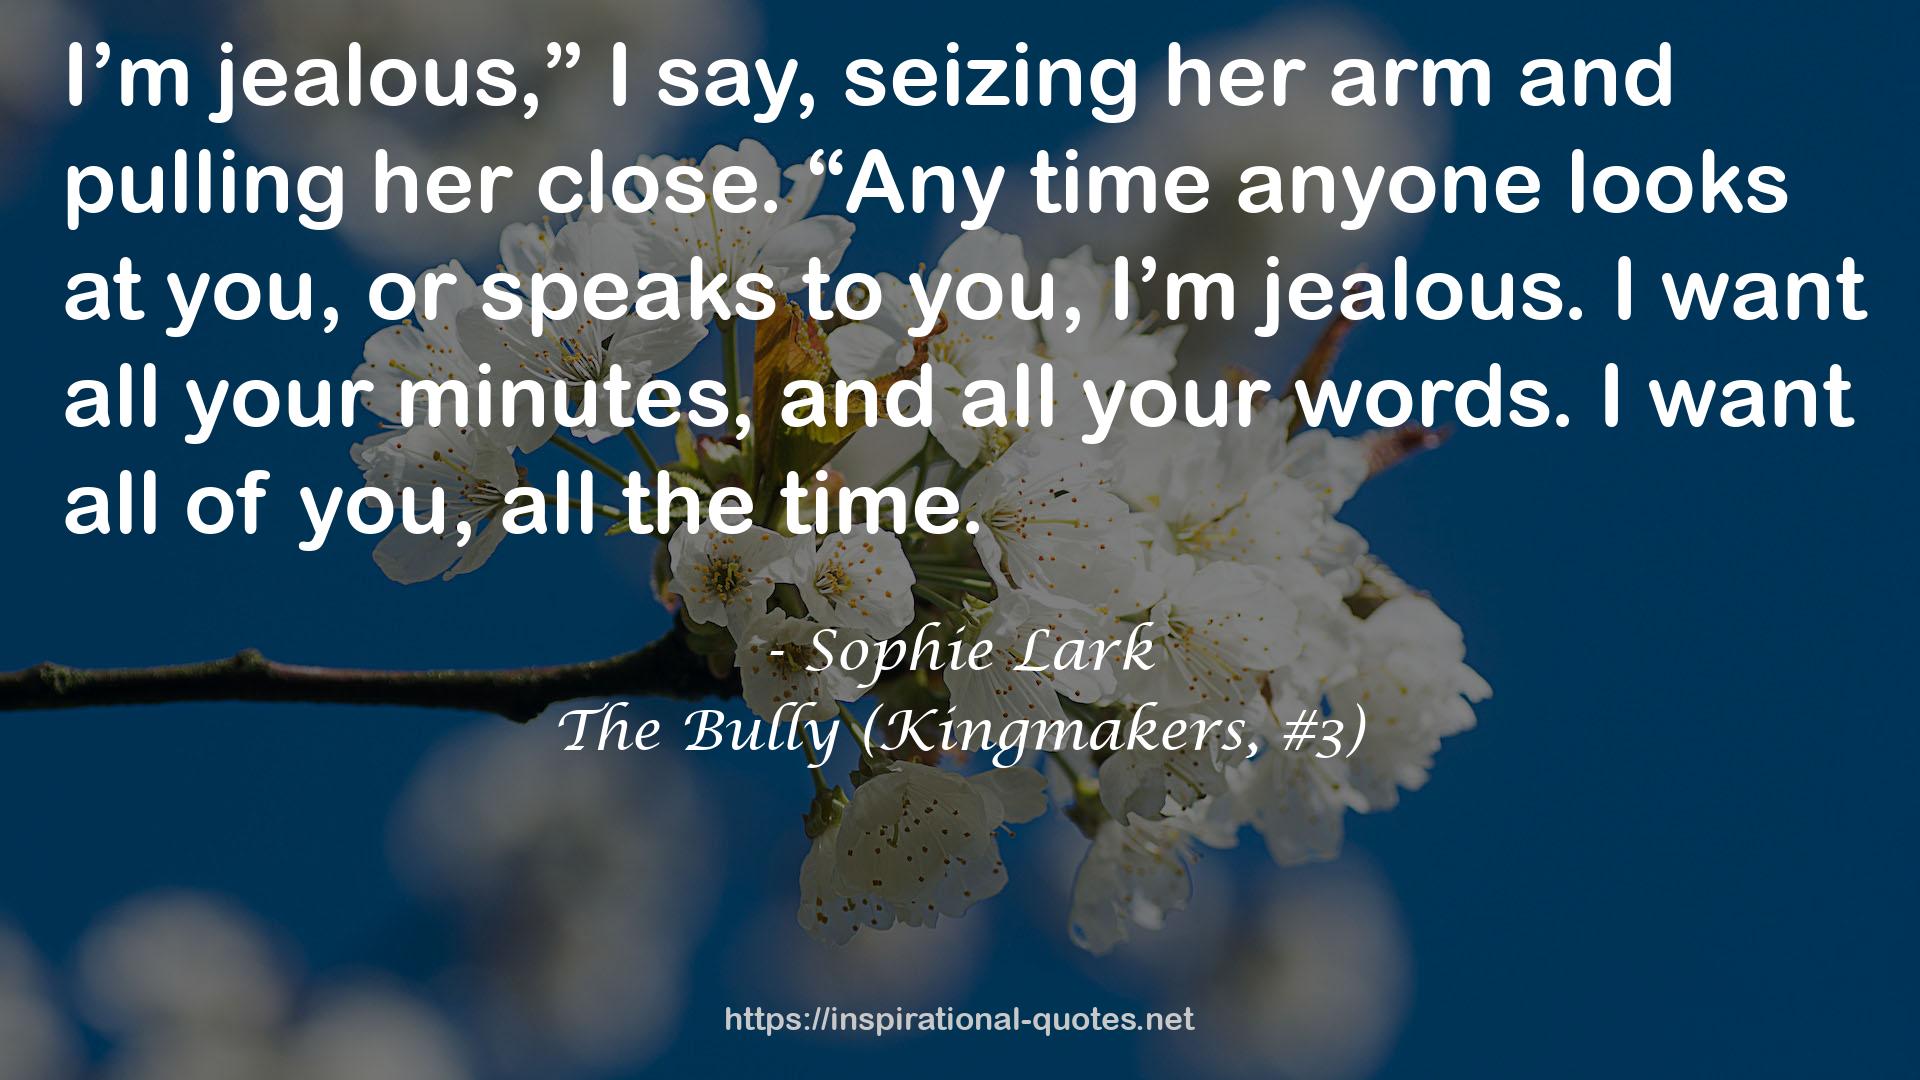 The Bully (Kingmakers, #3) QUOTES